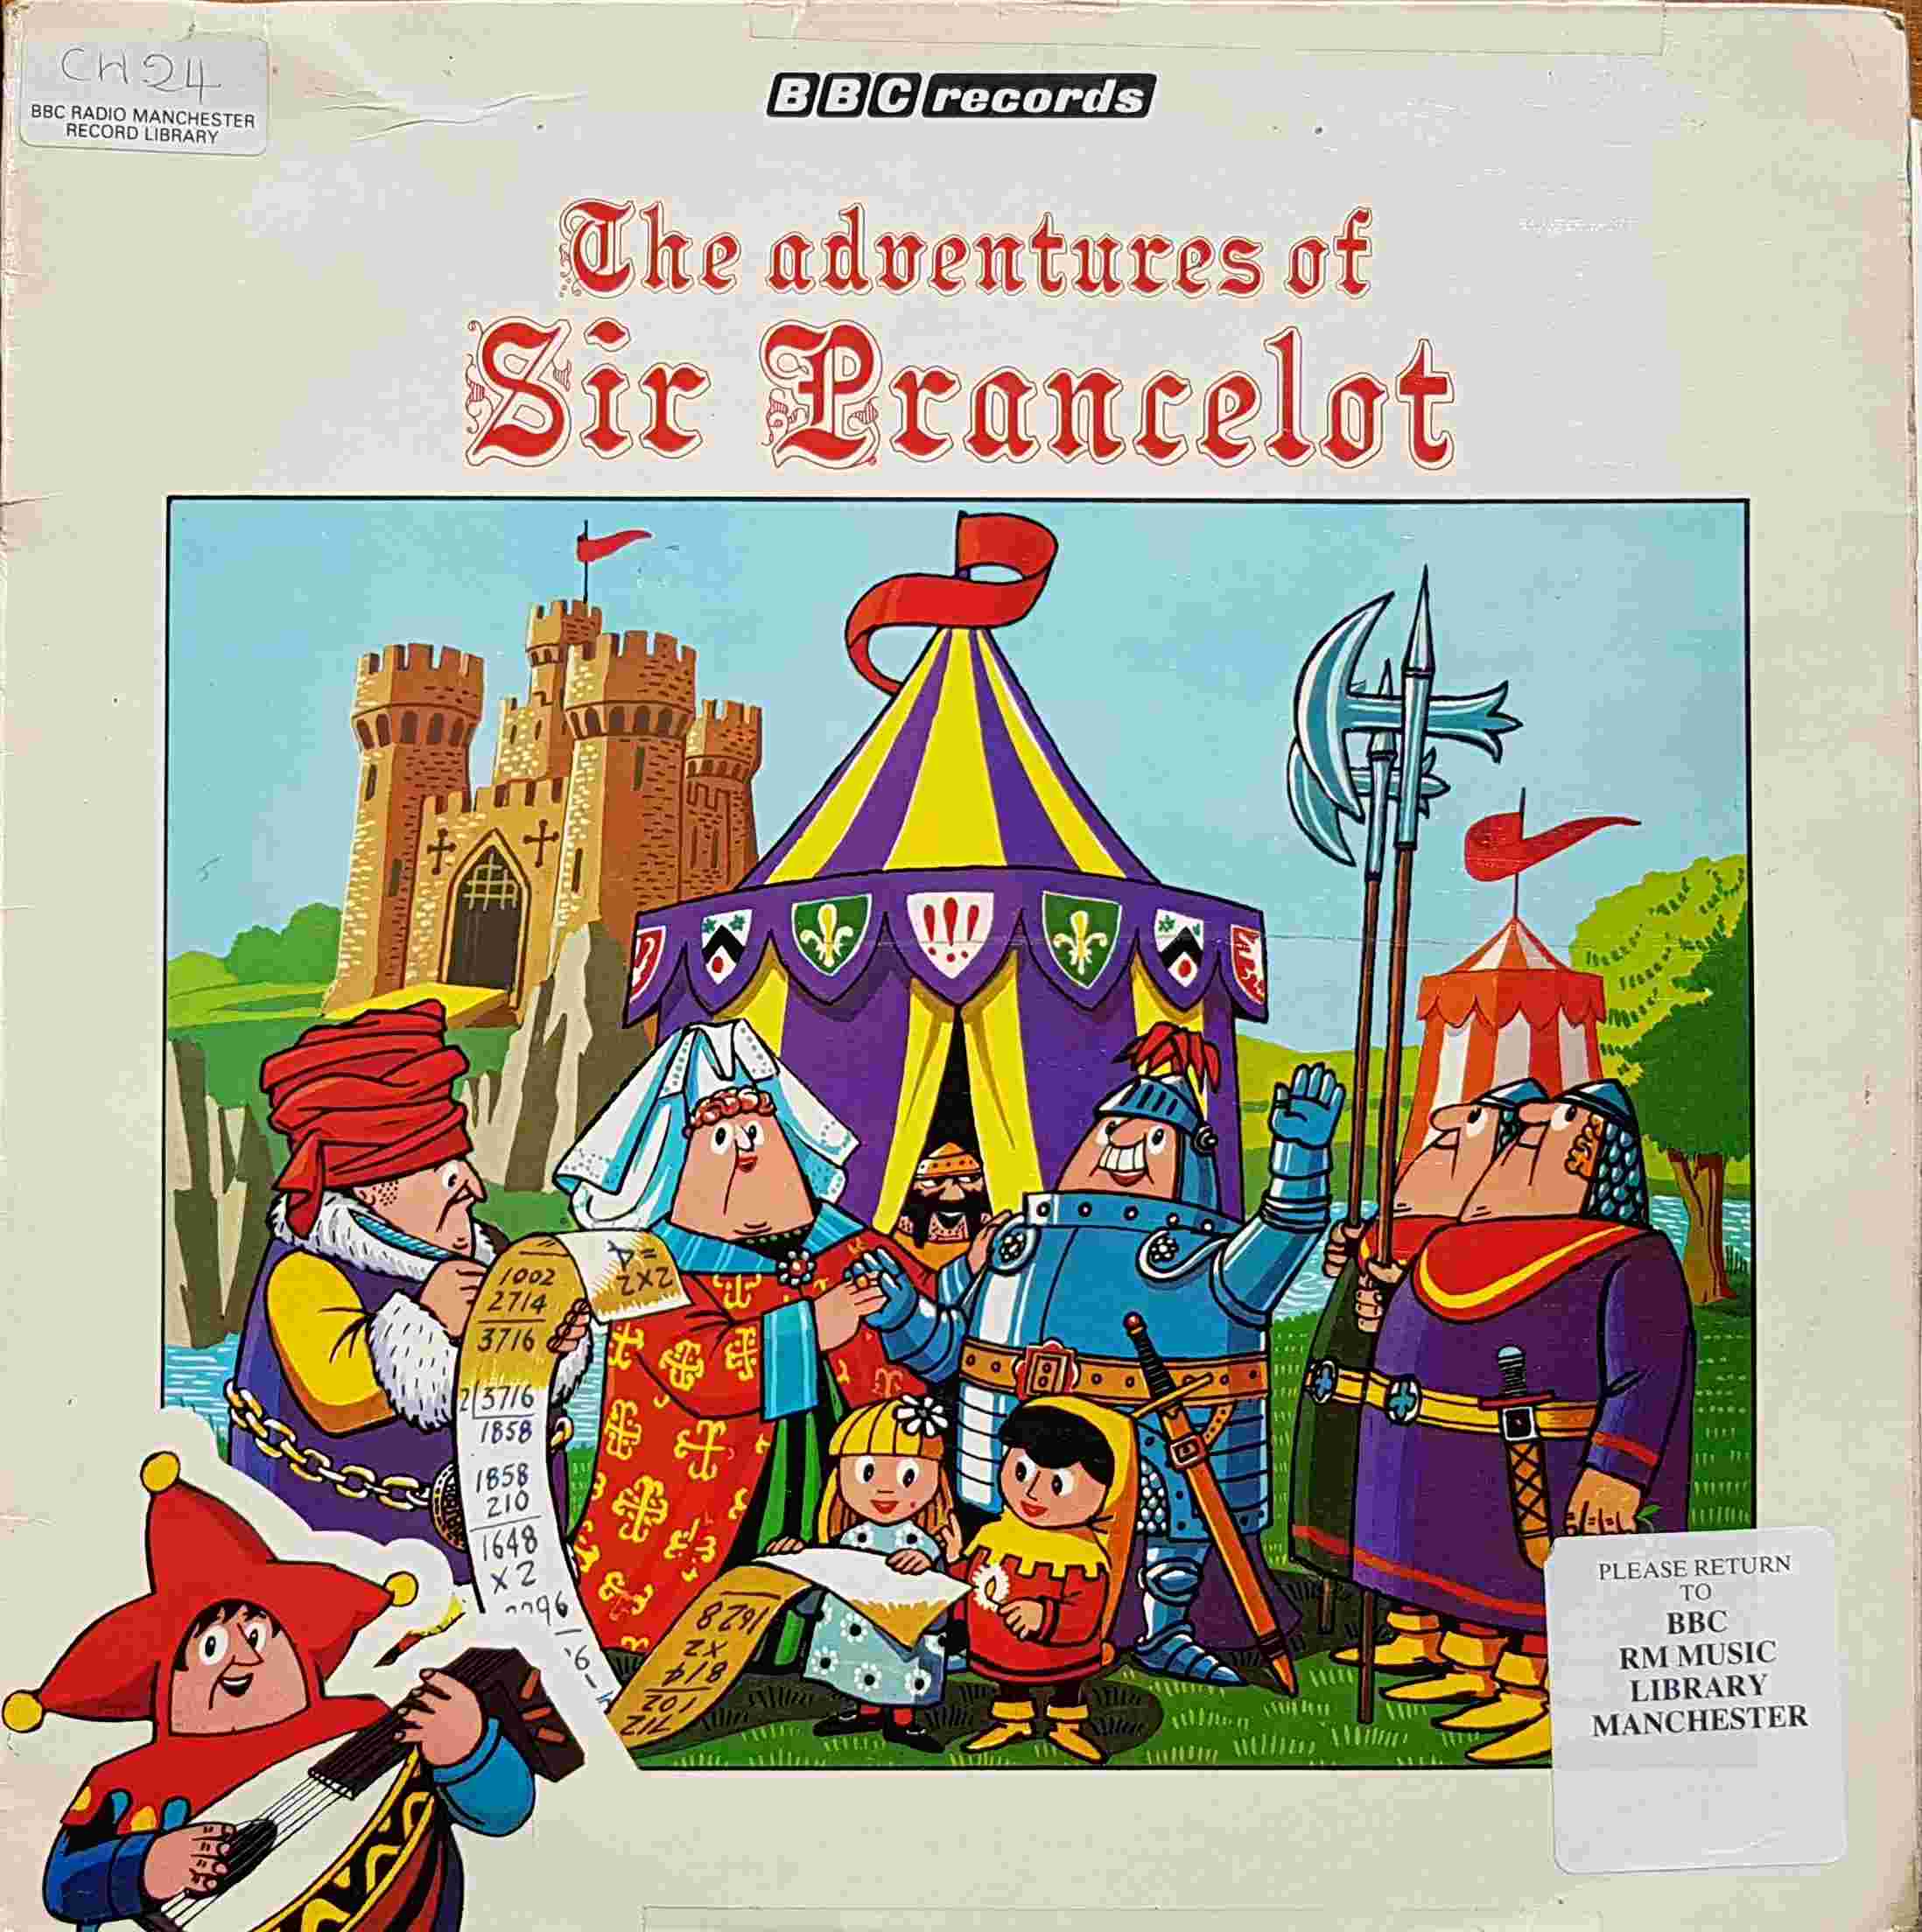 Picture of RBT 12 The adventures of Sir Prancelot by artist John Ryan from the BBC albums - Records and Tapes library